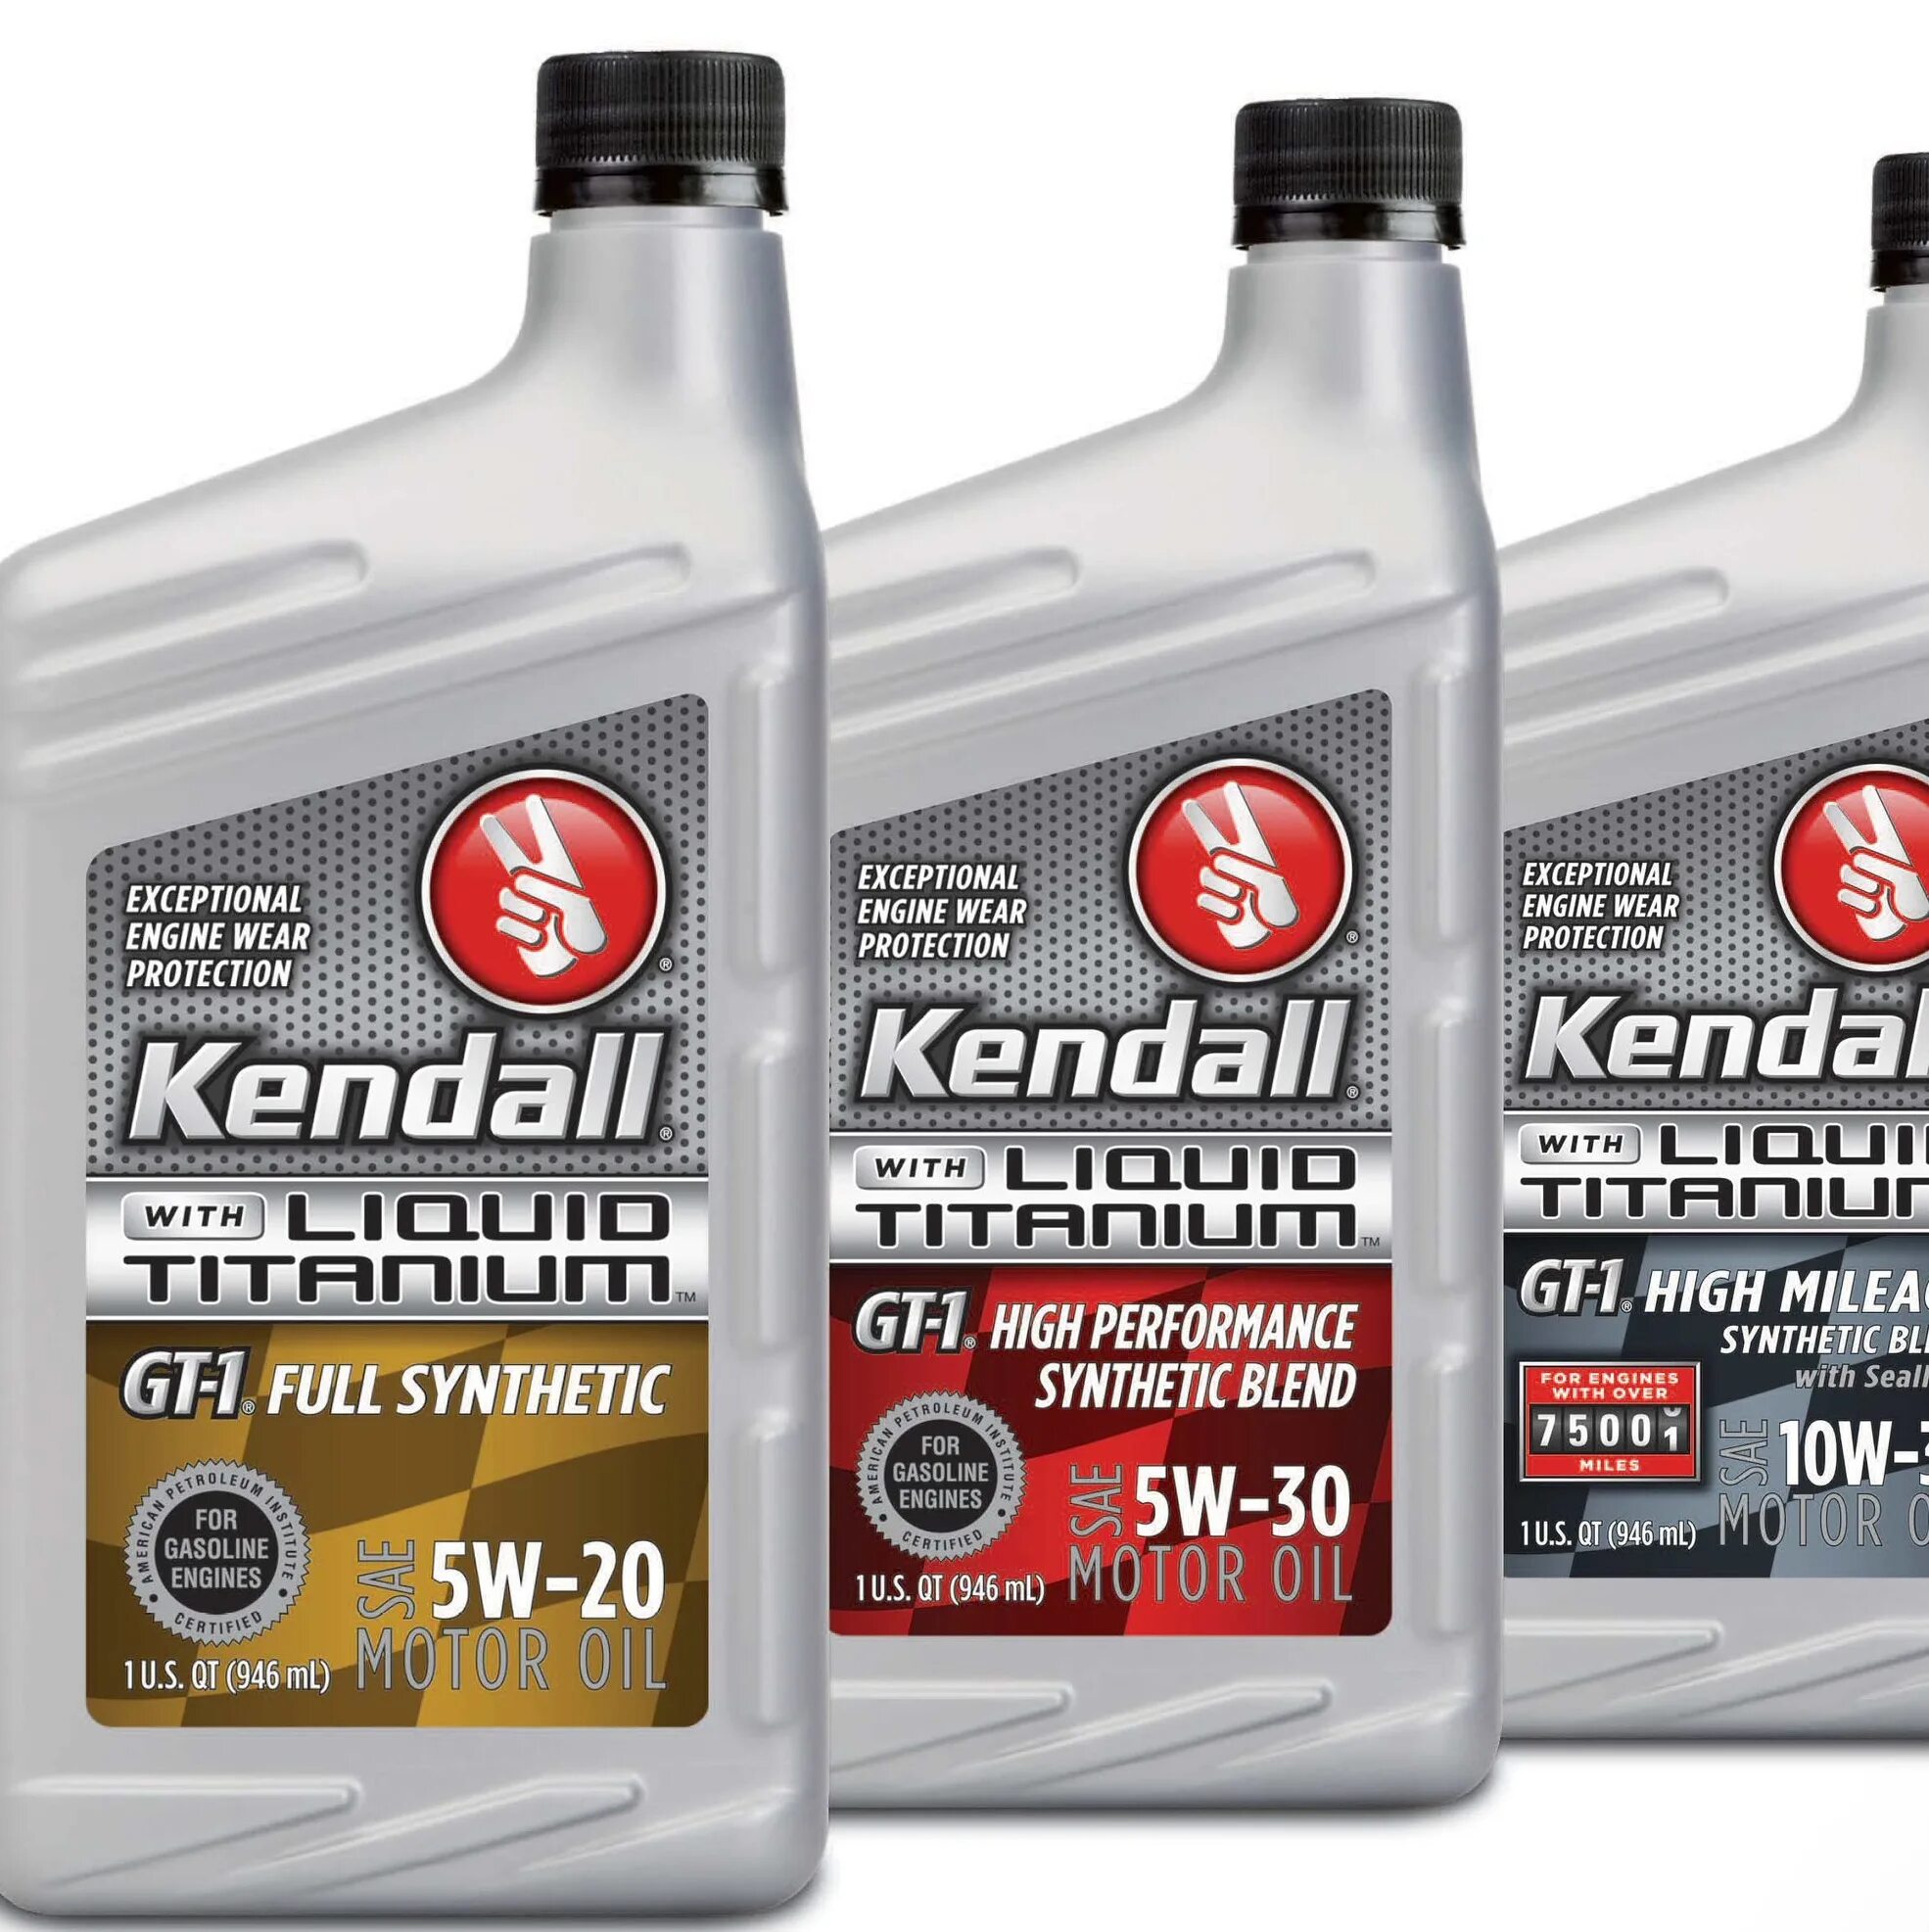 Масло моторное 5w30 clean. Моторное масло Kendall gt-1 5w30. Kendall gt-1 5w-20 High Performance Synthetic Blend Motor Oil with Liquid Titanium. Kendall gt-1 High Performance Synthetic Blend Liquid Titanium 5w-30. Масло Kendall 0w20 gt1.